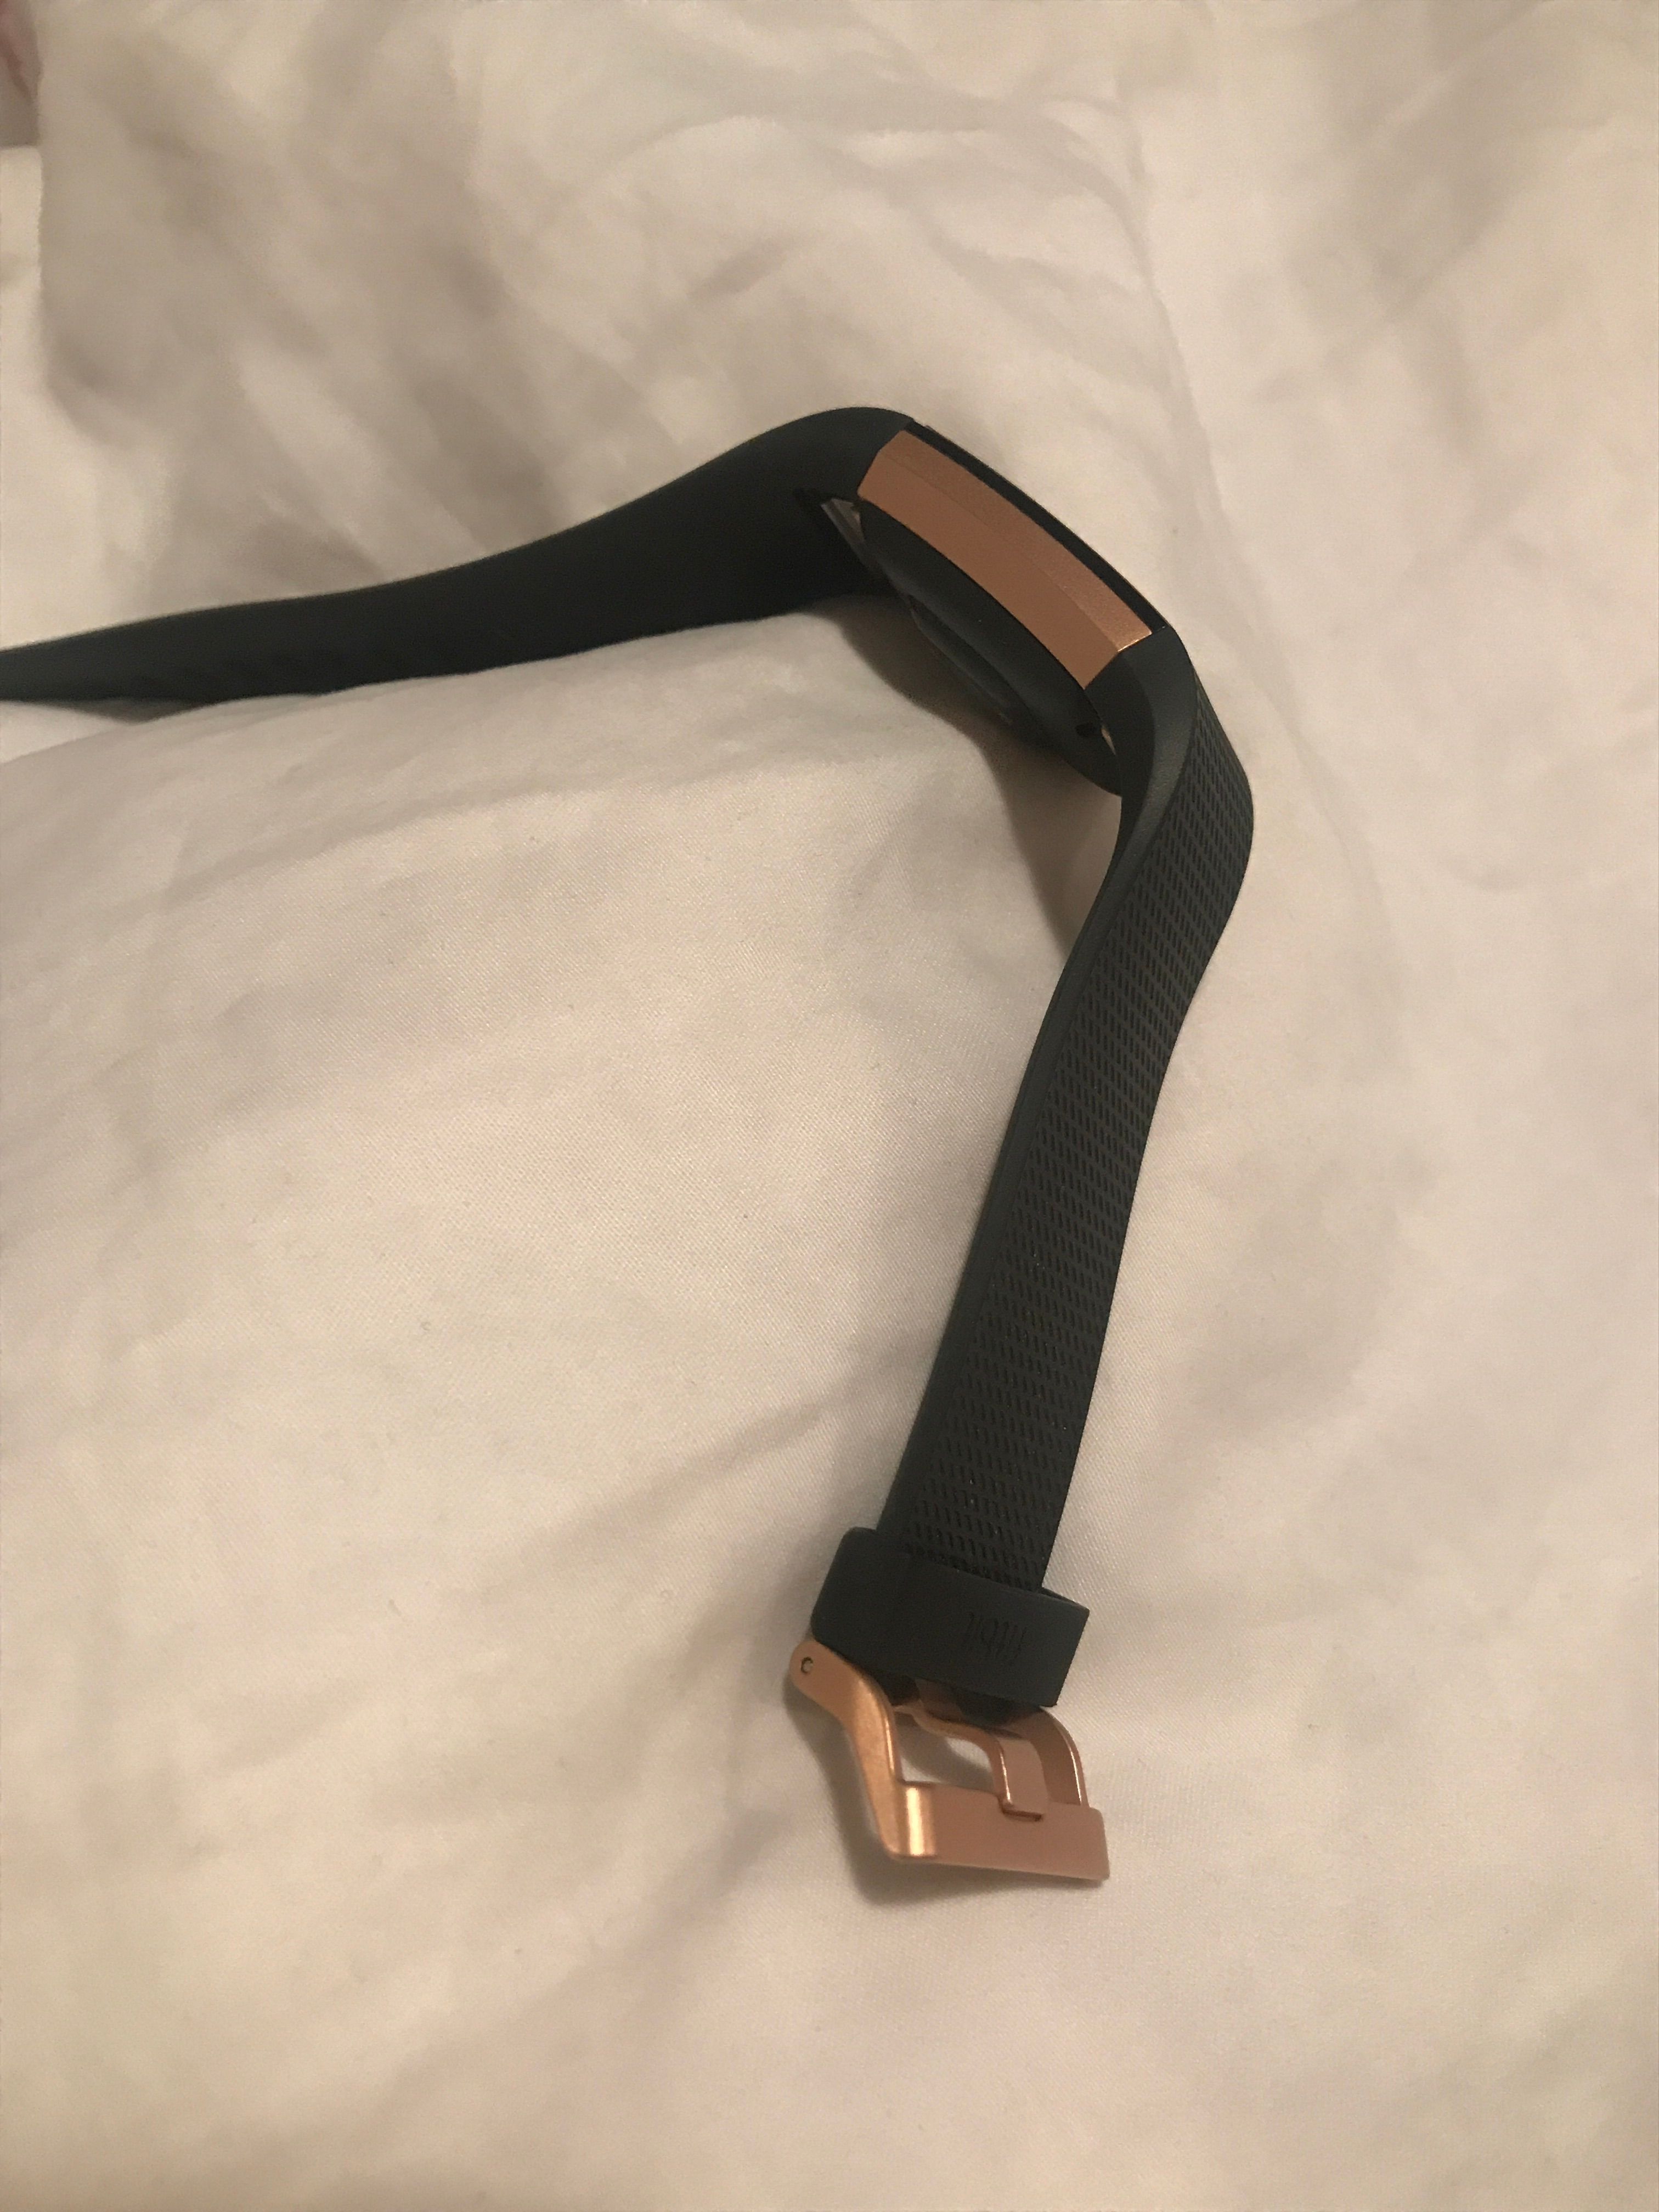 black and rose gold fitbit